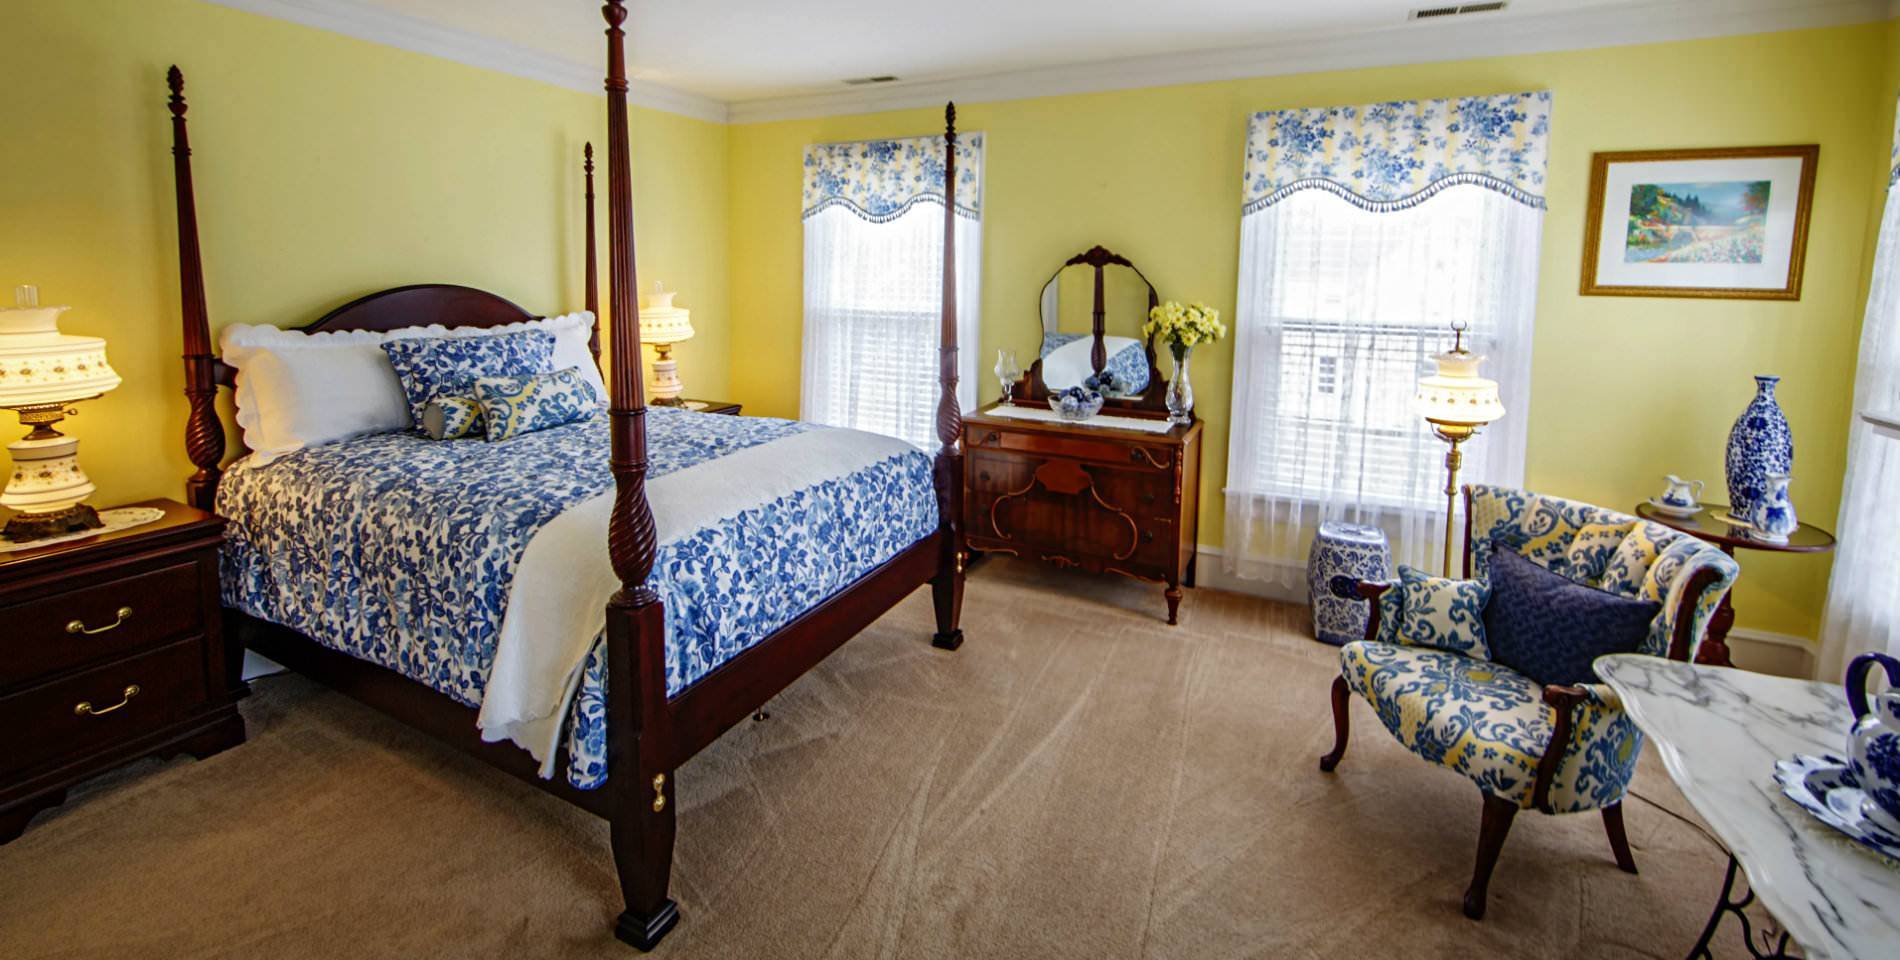 The Alyce Wilson room with a four post wooden bed, blue and white patterned furniture and yellow walls.  